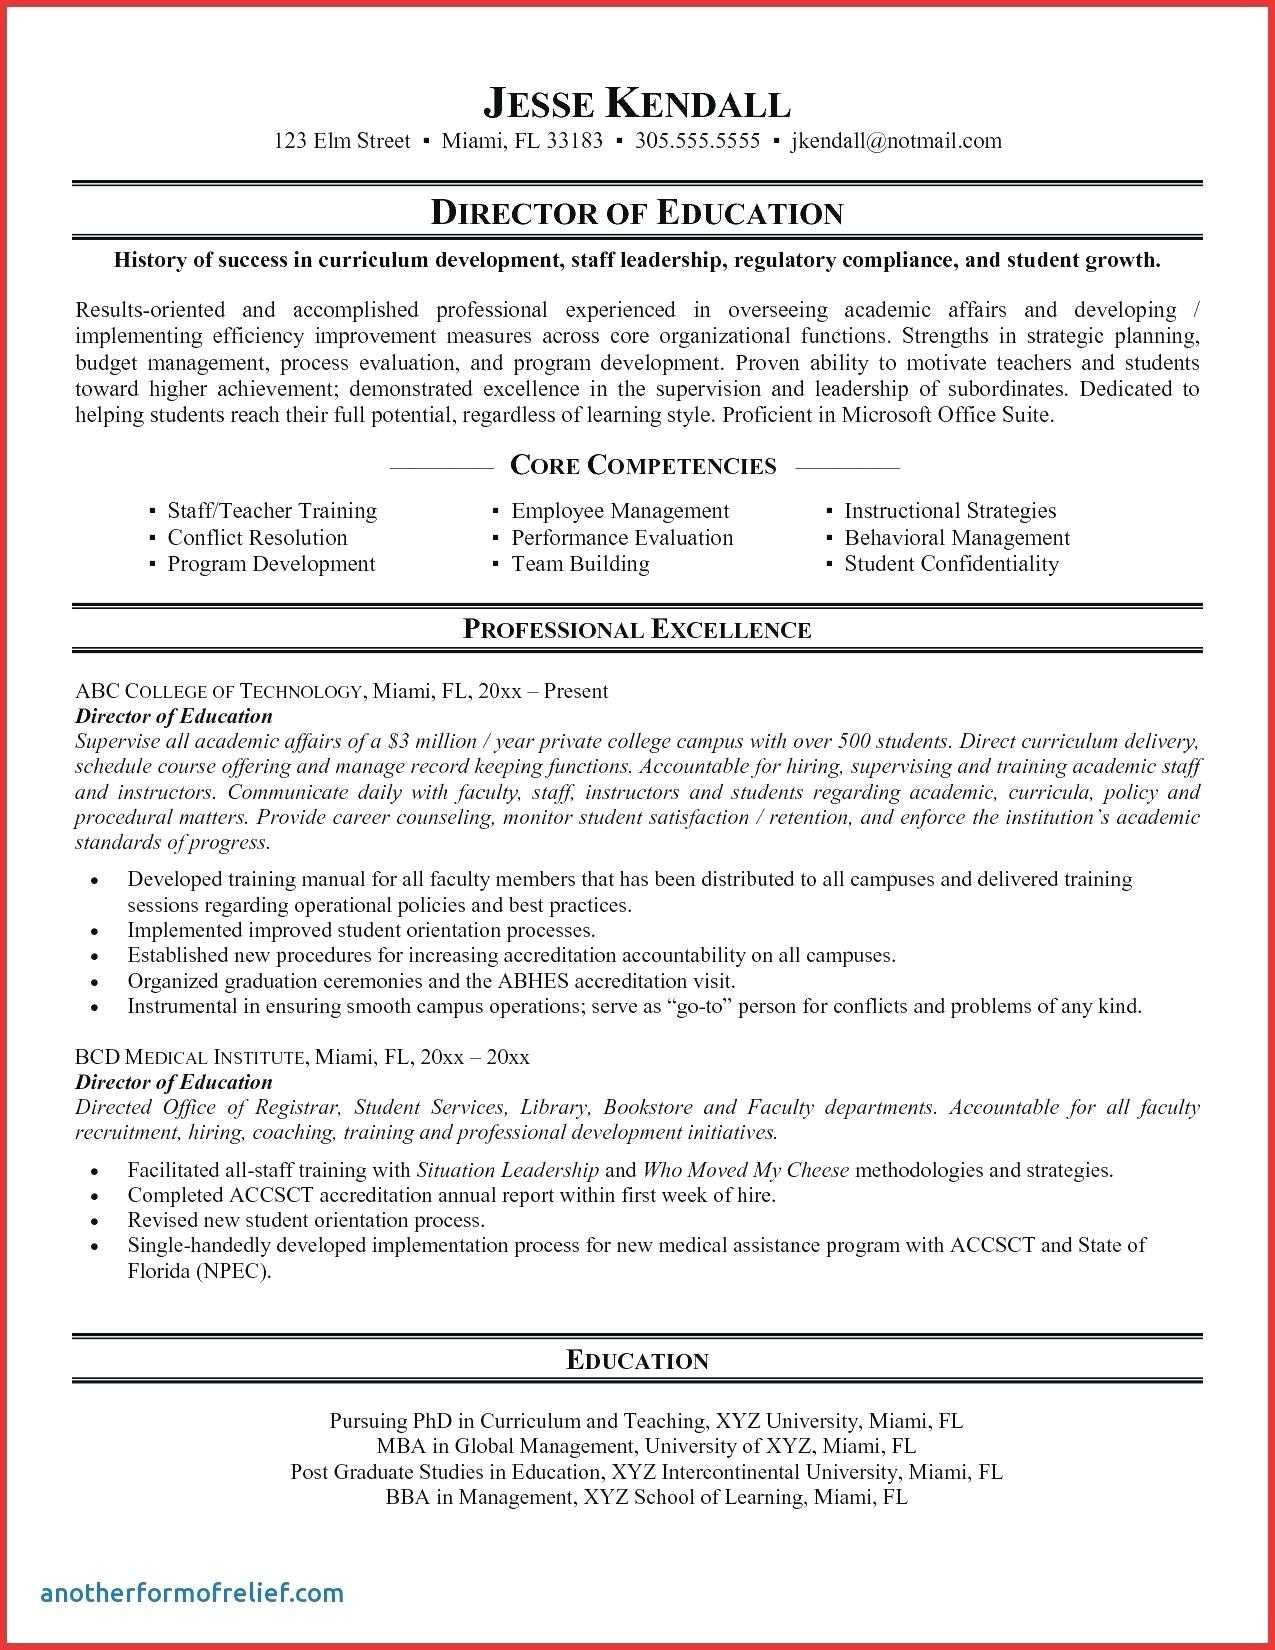 10 University Report Format | Resume Samples Within Training Report Template Format